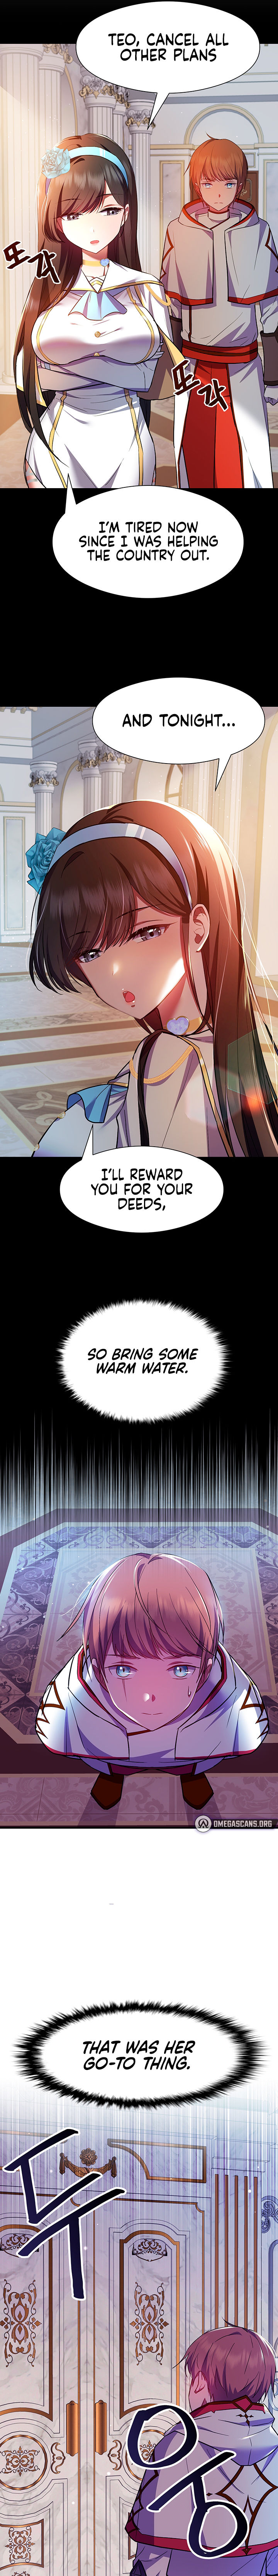 Training an Evil Young Lady - Chapter 1 Page 17